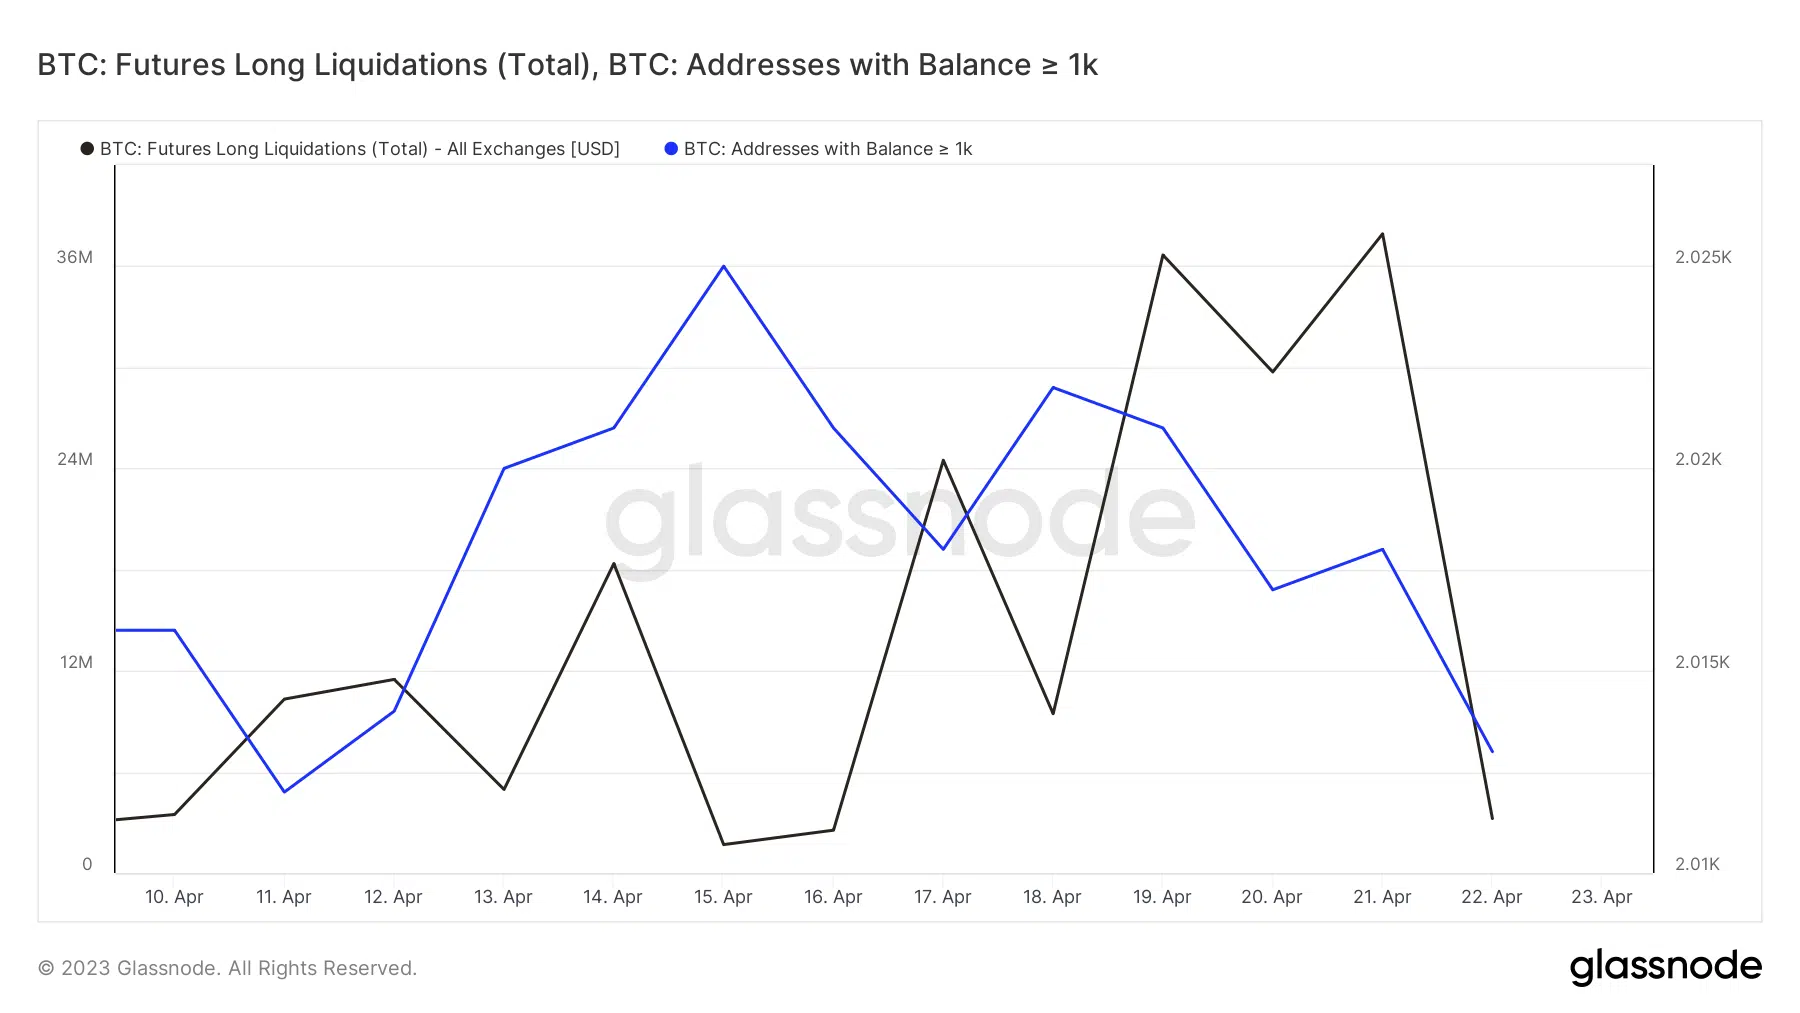 Bitcoin whale addresses and futures long liquidations